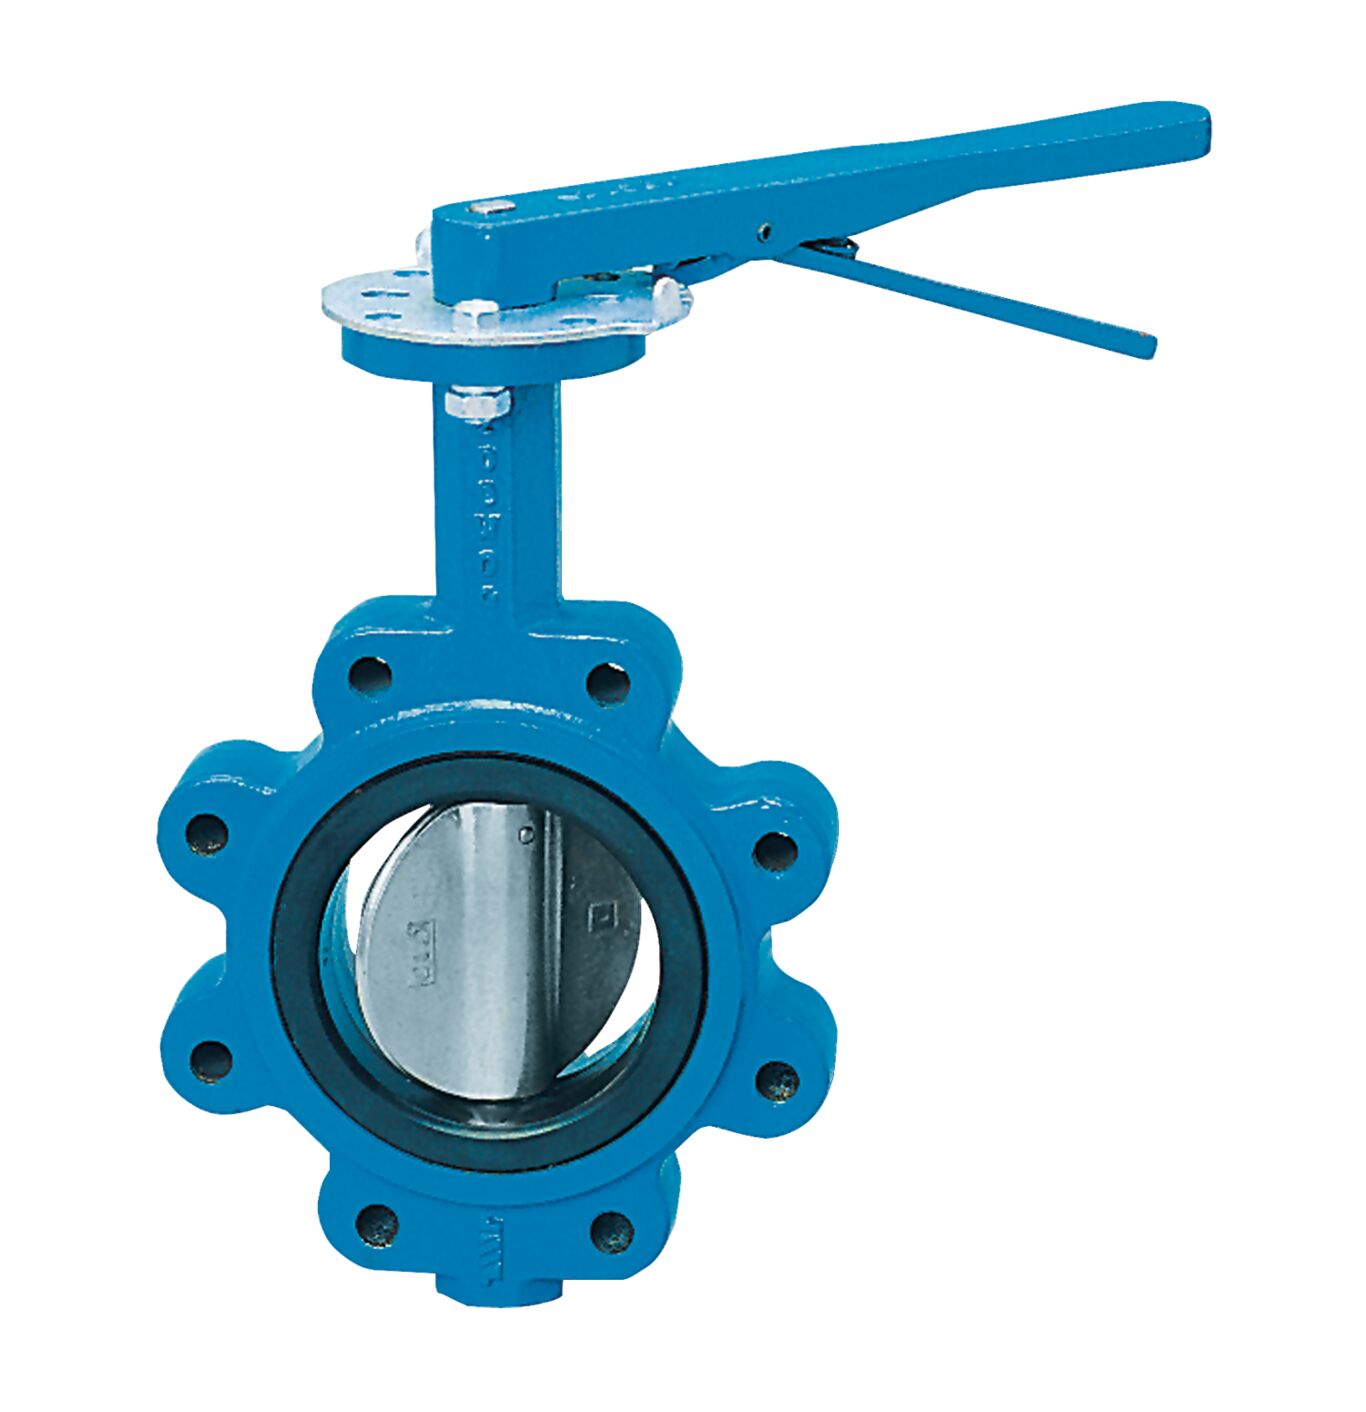 6" Inch Butterfly Valve Wafer Type 200PSI Ductile iron body DI disc EPDM Seat 